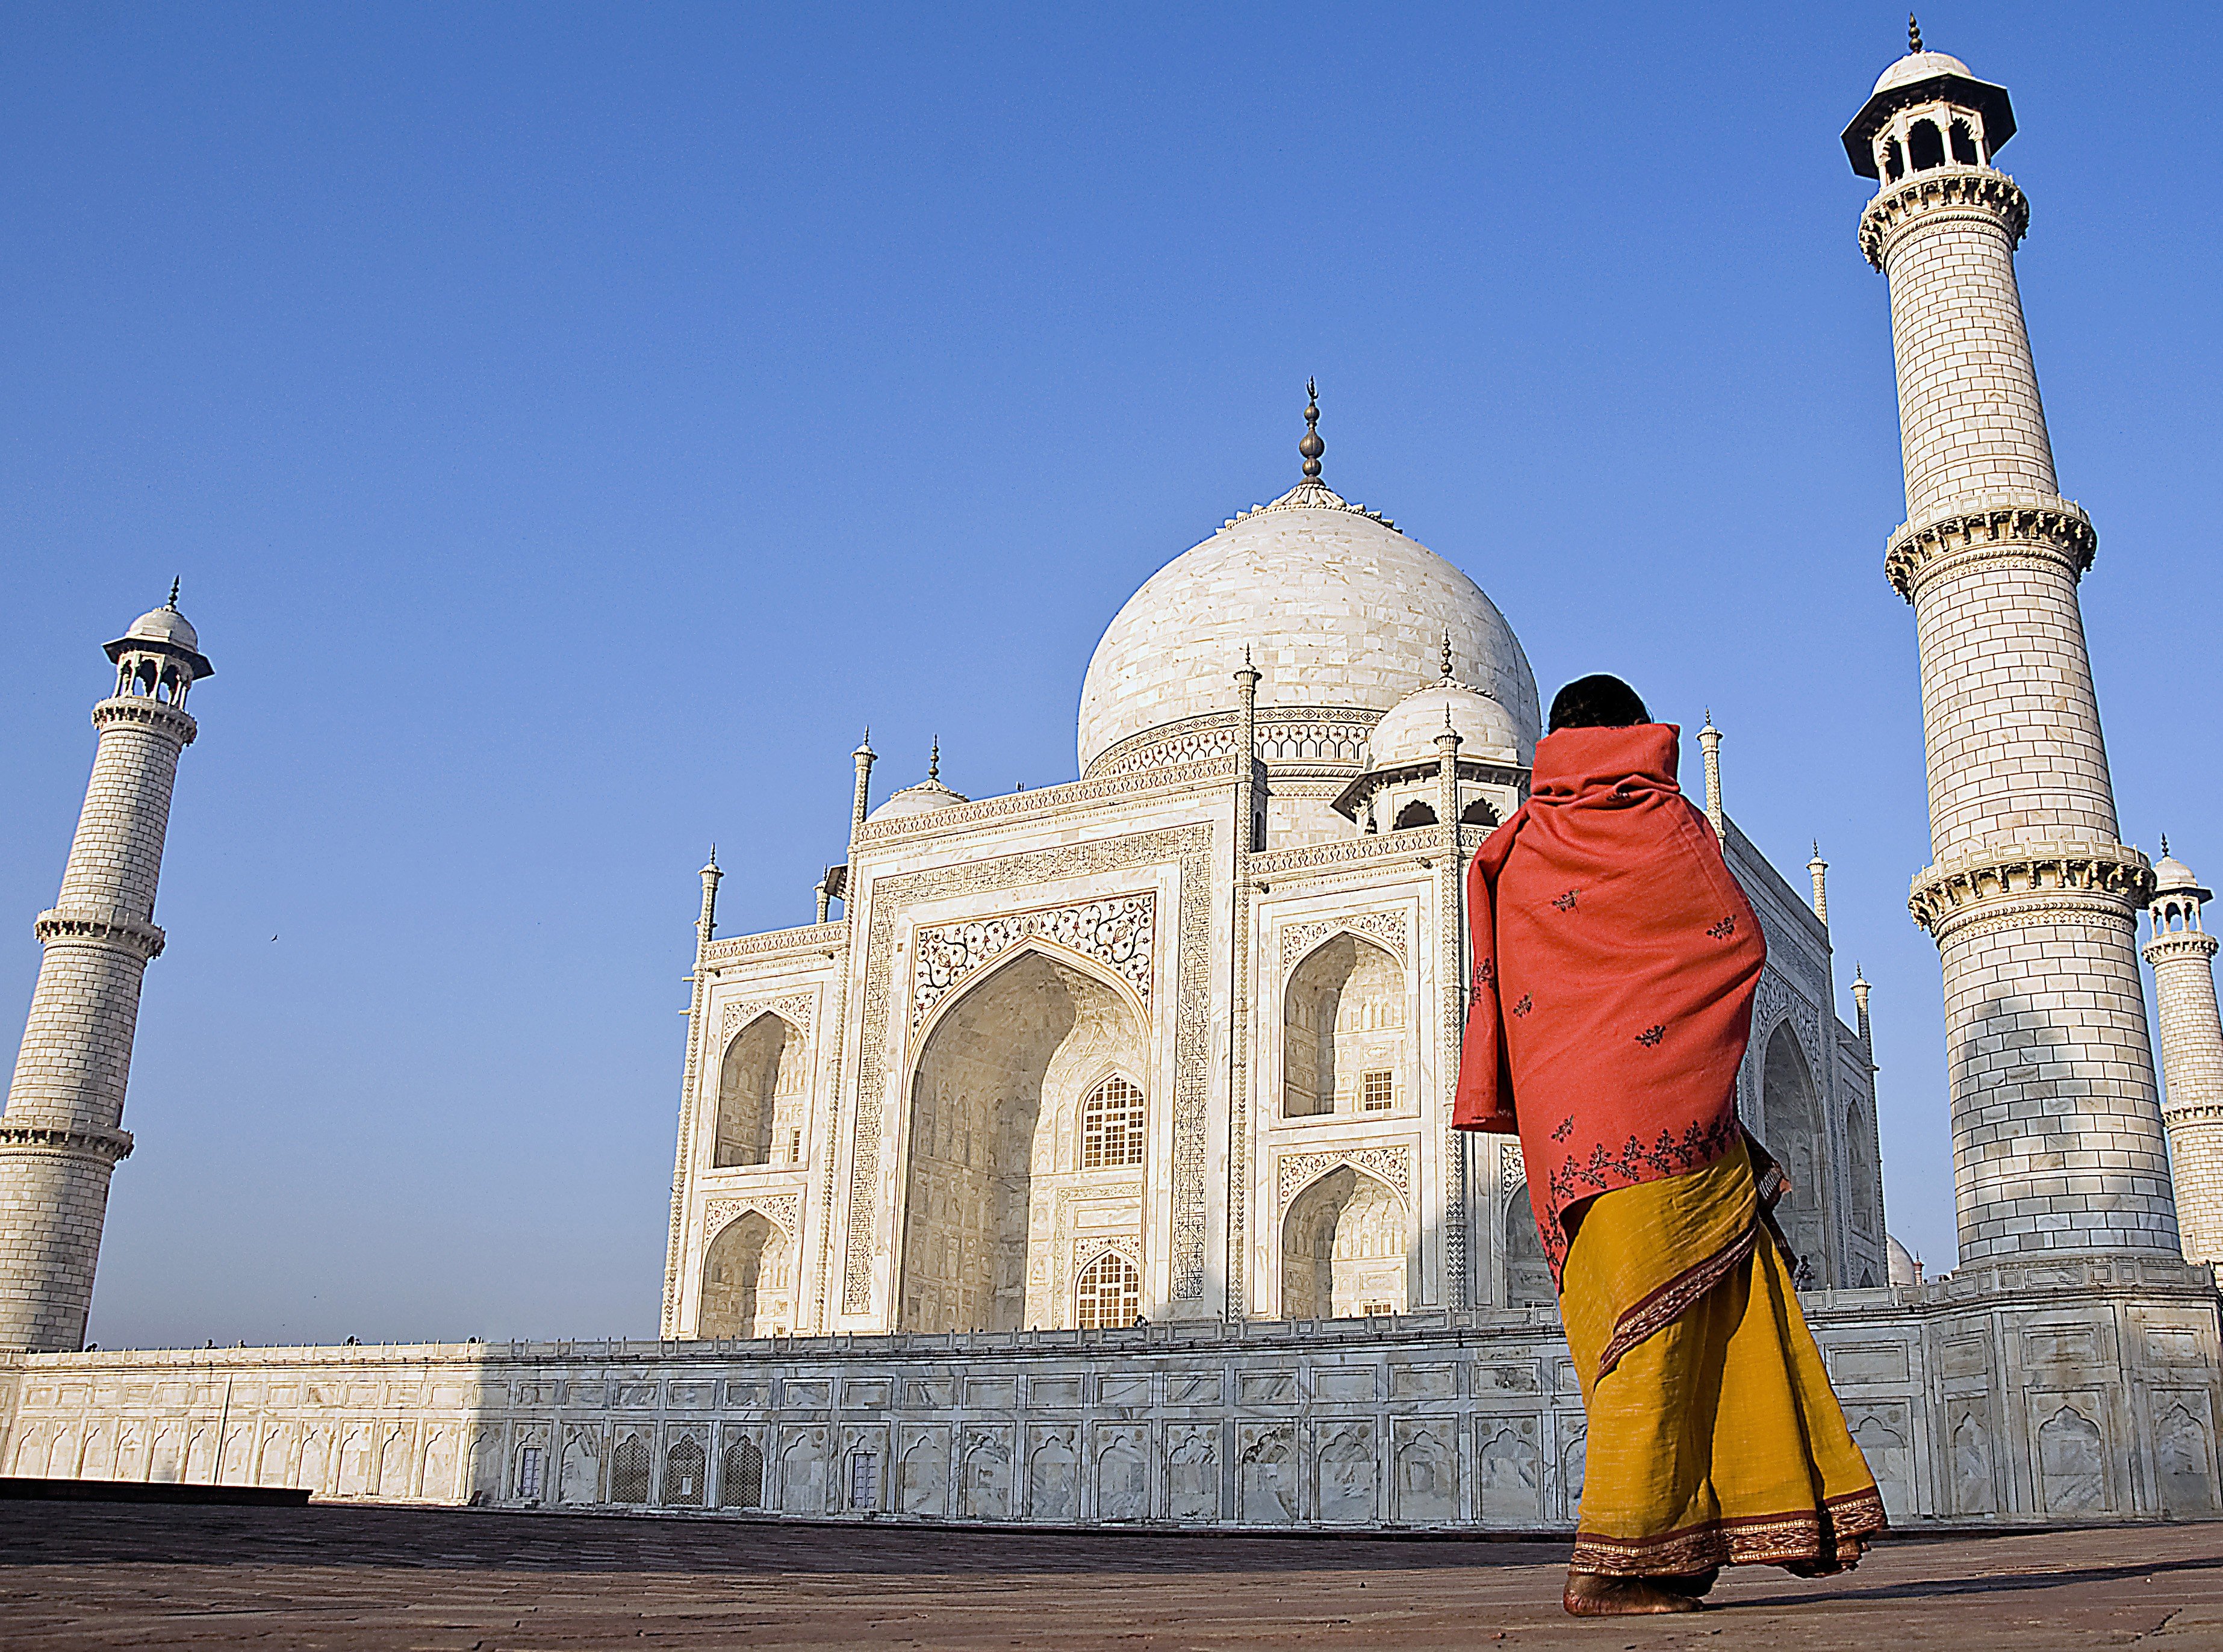 A woman looks up at the facade of the Taj Mahal in Agra, India. Photo: Post Magazine